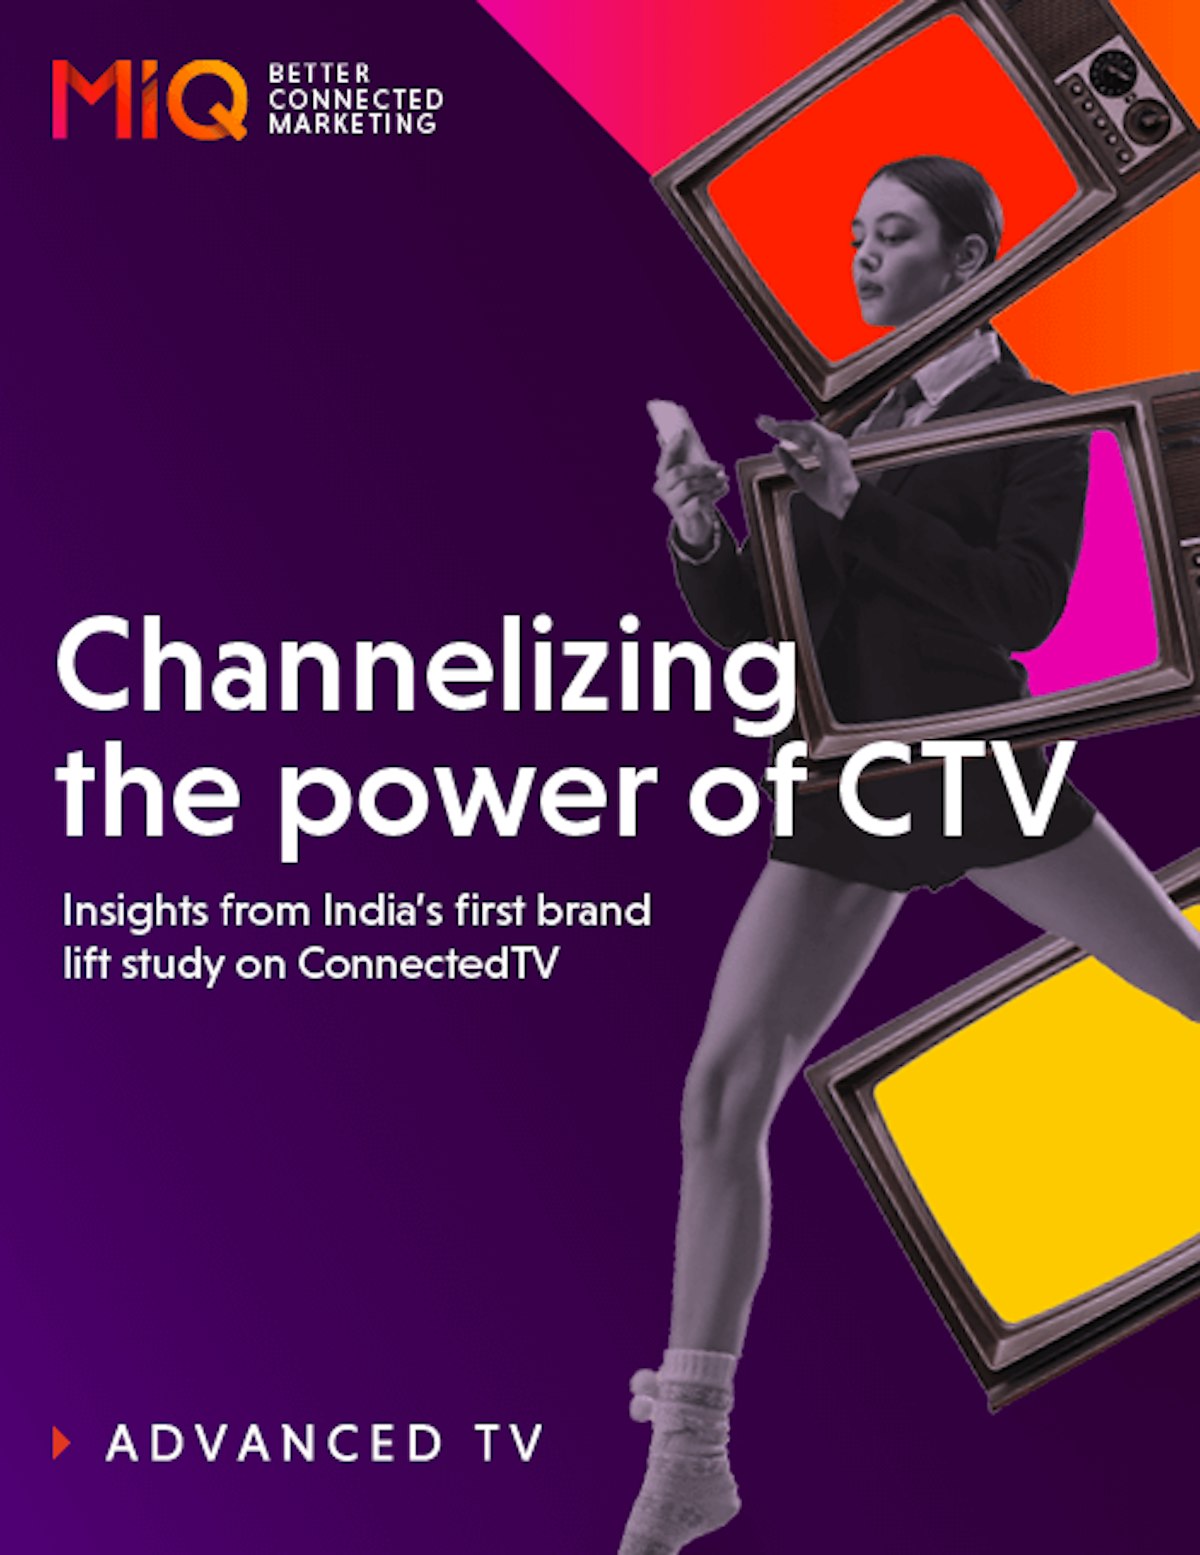 Channelizing the power of CTV